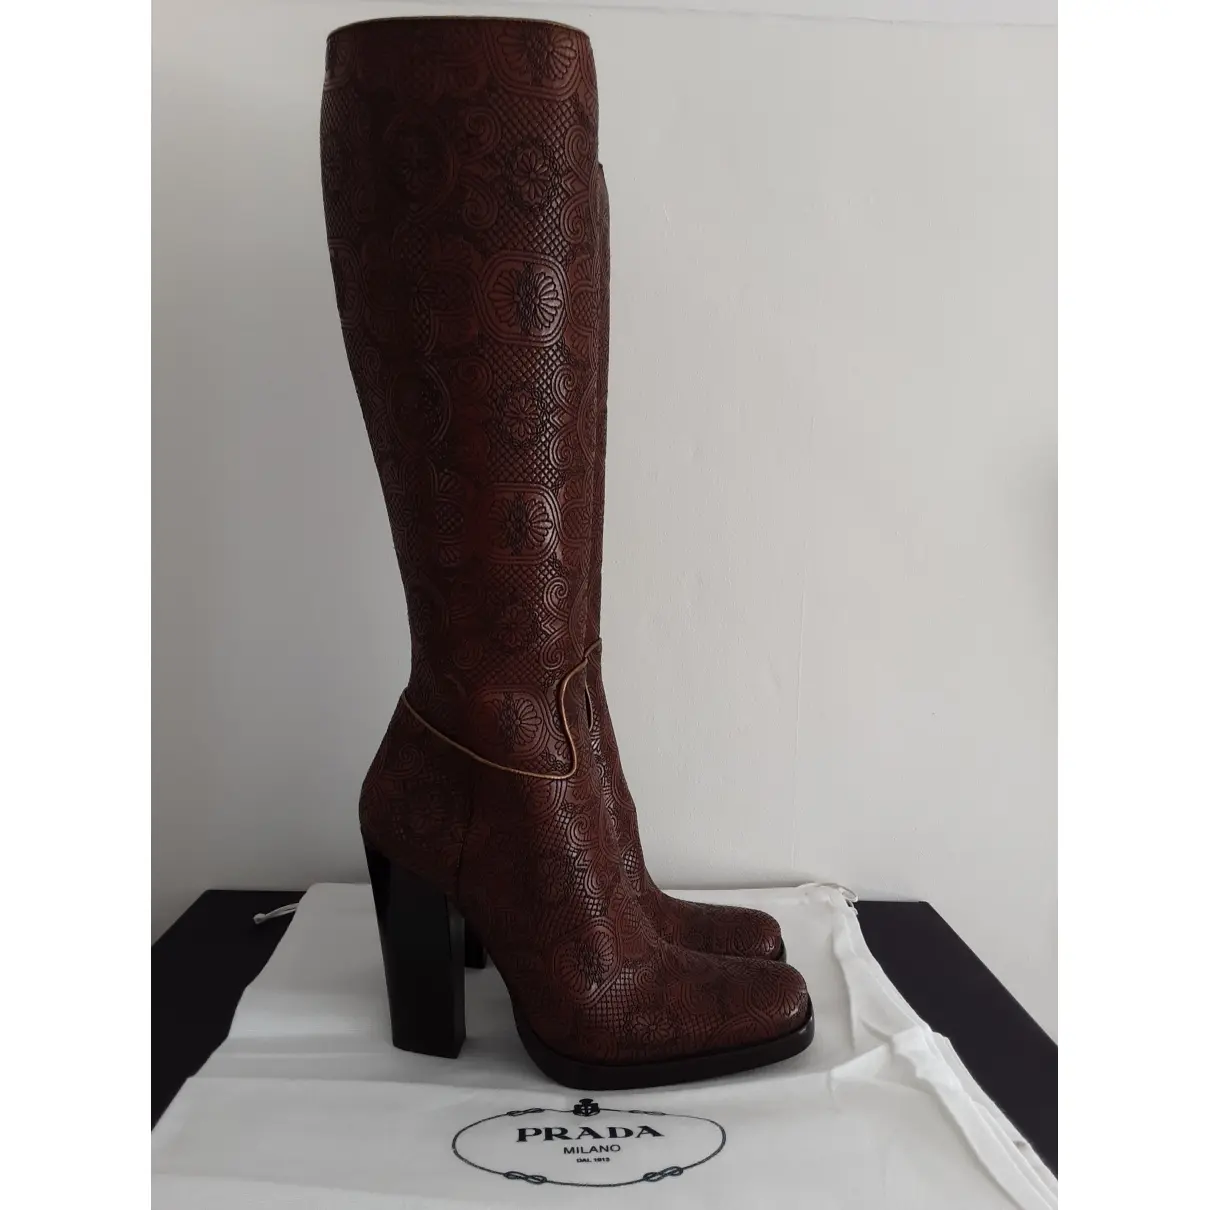 Prada Leather boots for sale